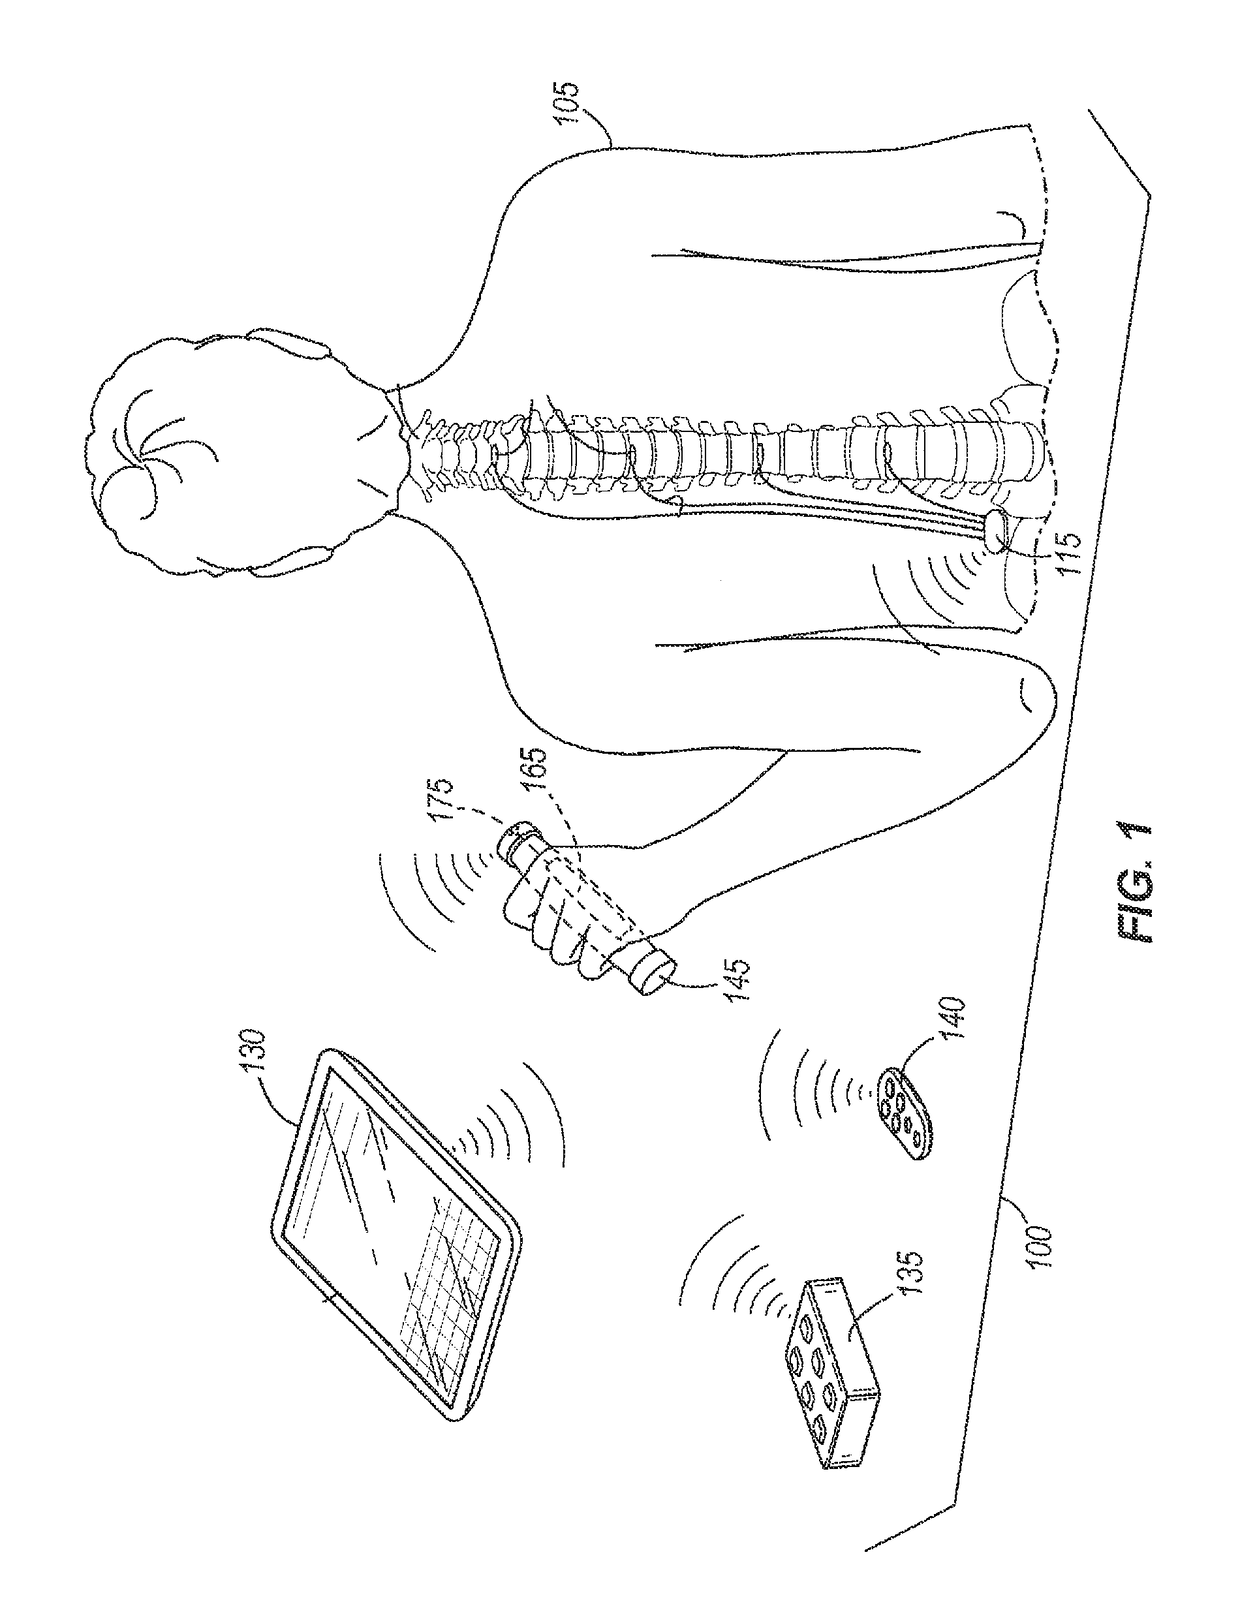 Patient handheld device for use with a spinal cord stimulation system